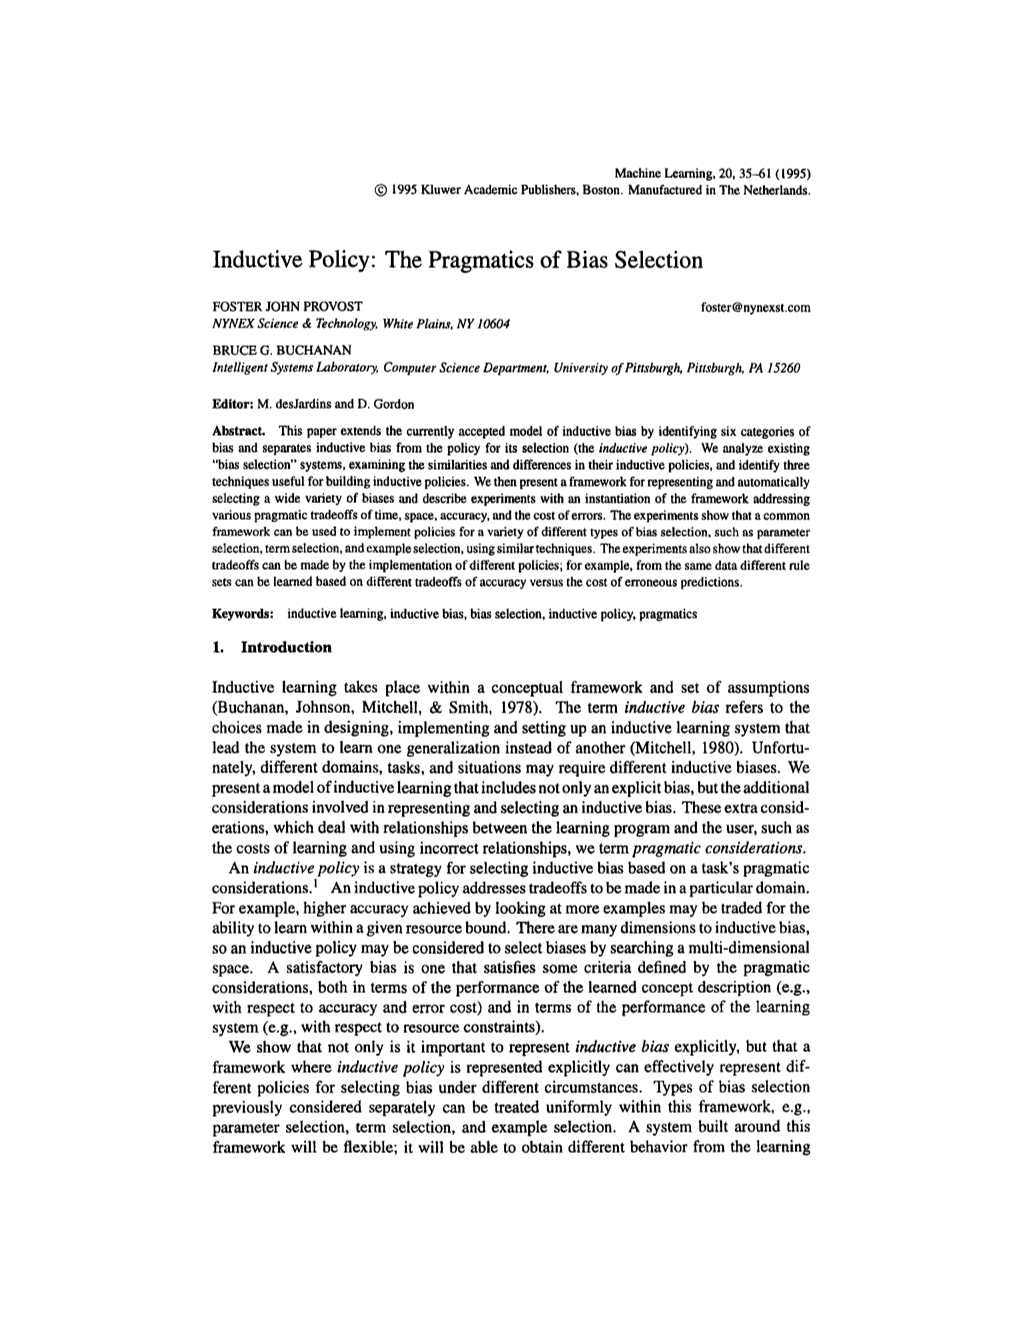 Inductive Policy: the Pragmatics of Bias Selection